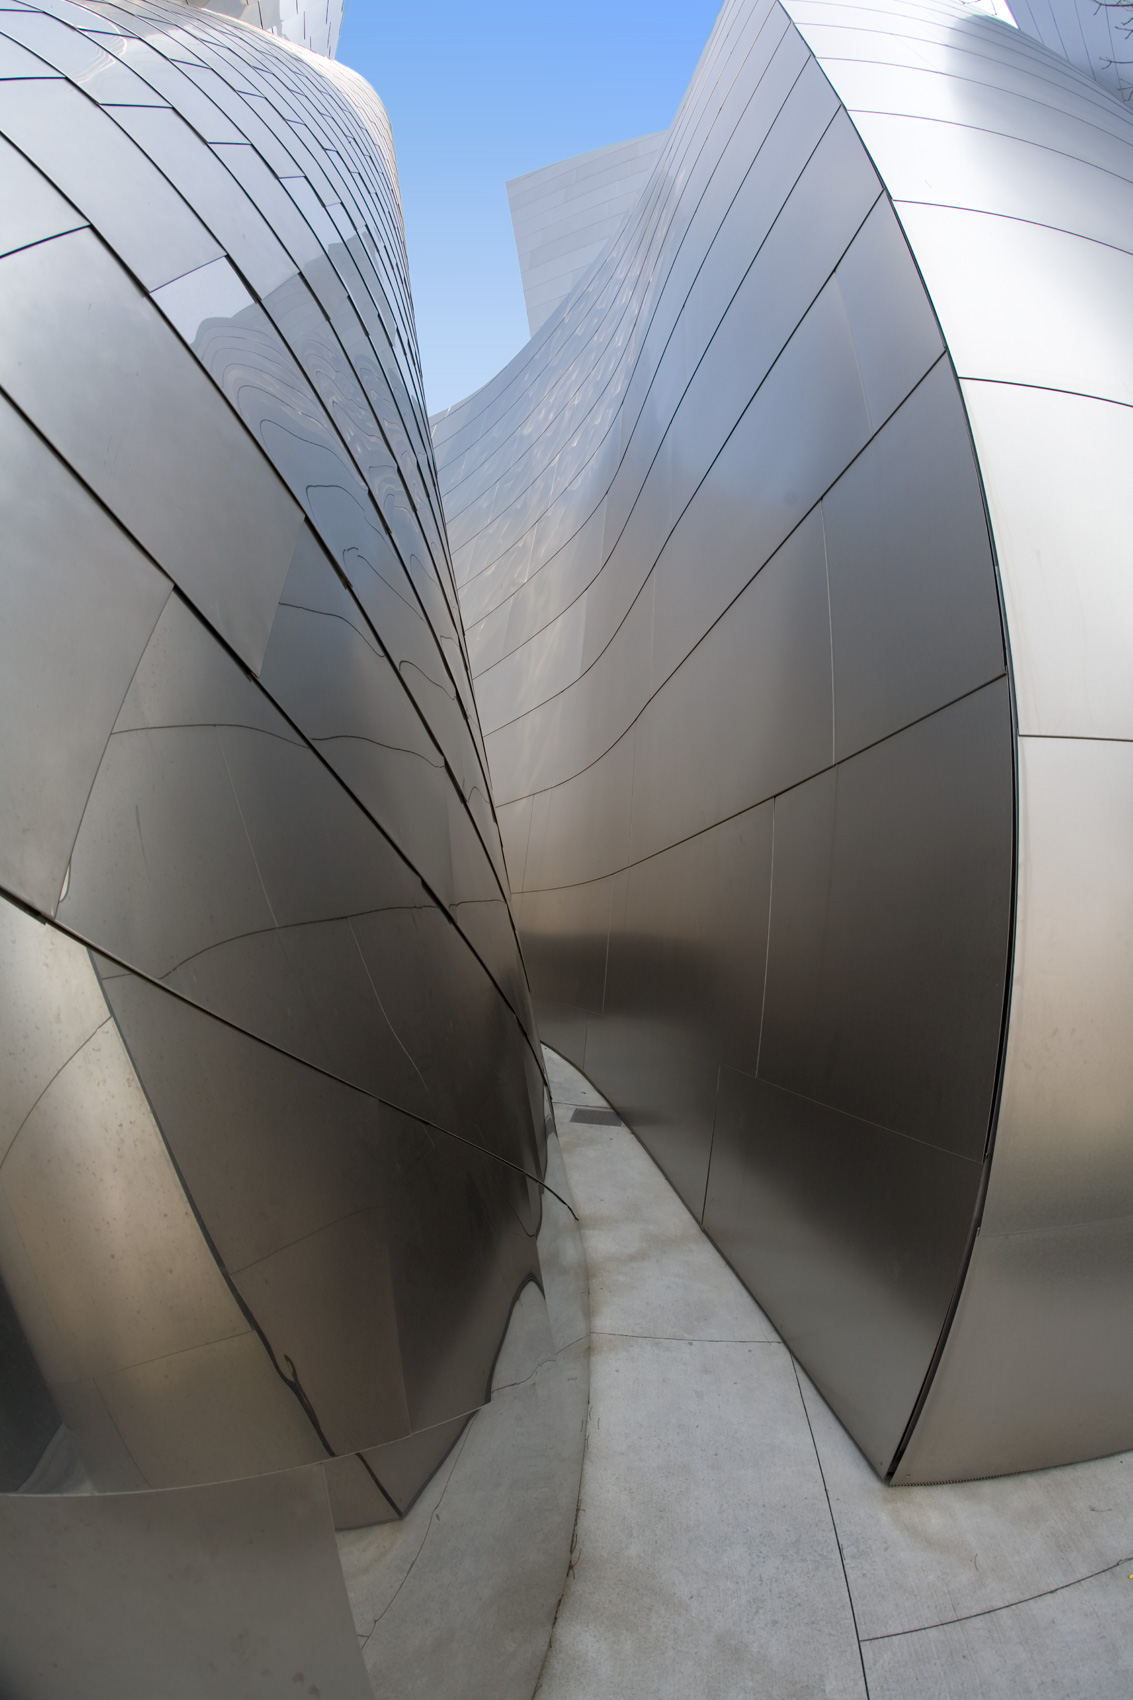 Vertical image of the metal hall of the Disney Concert Hall